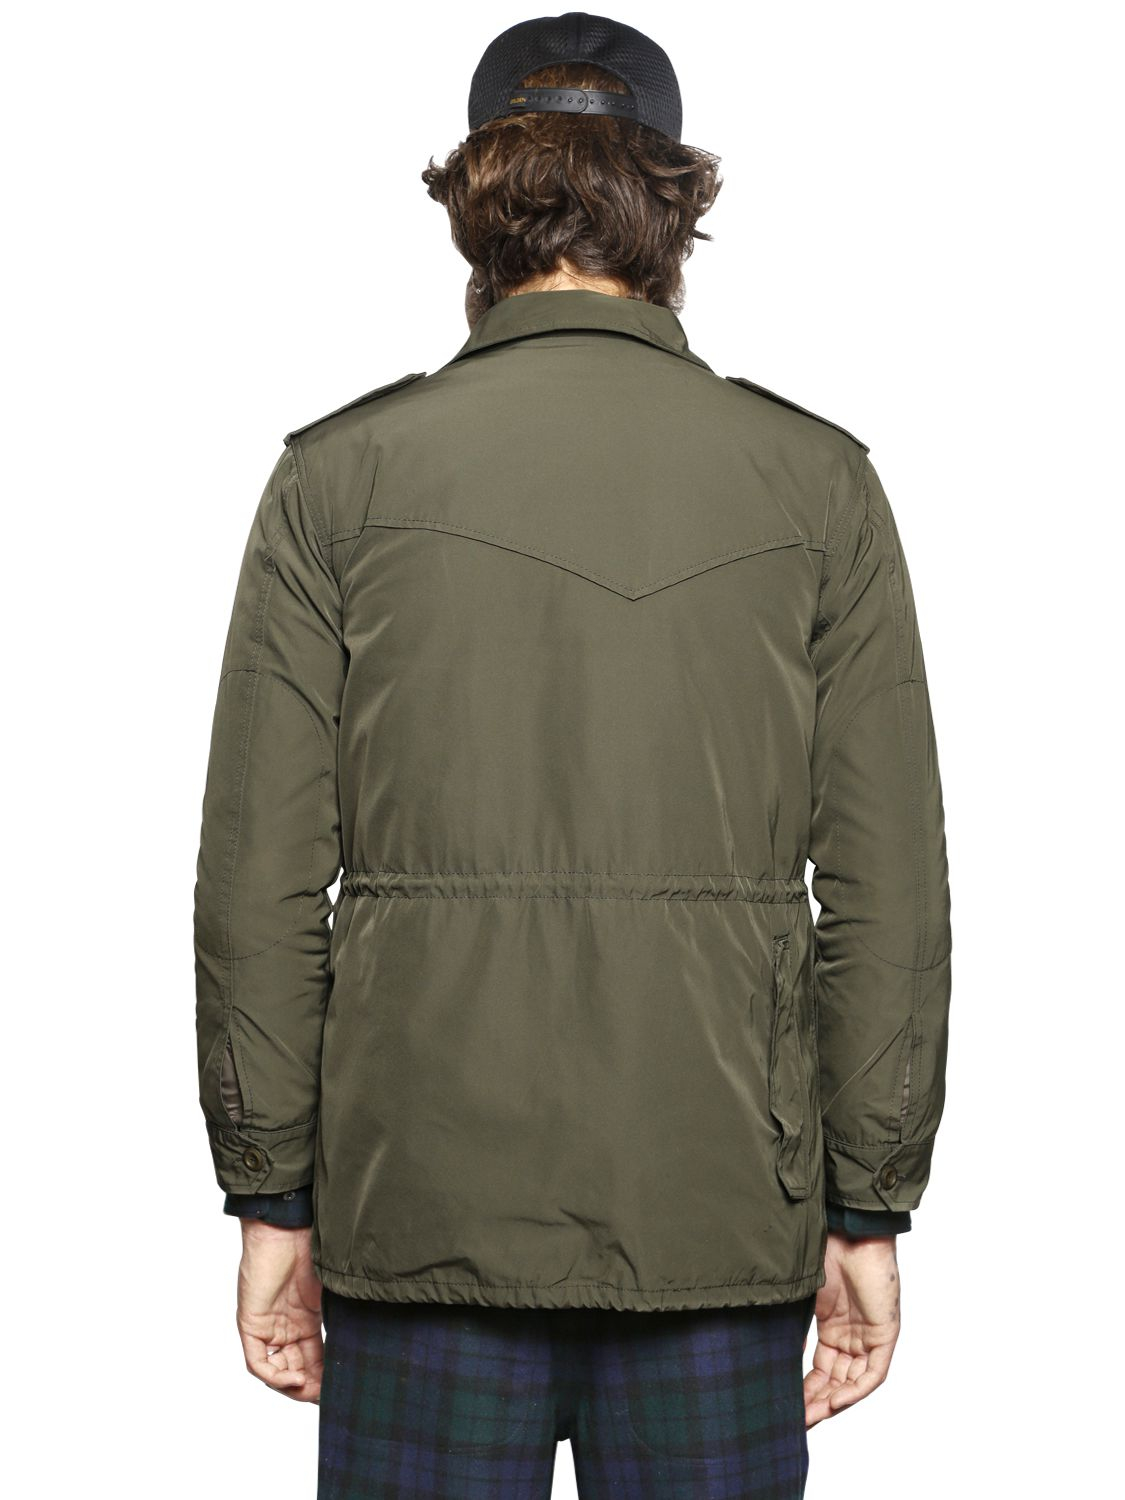 Lyst - Golden Goose Deluxe Brand Nylon Canvas Parka & Down Jacket in ...